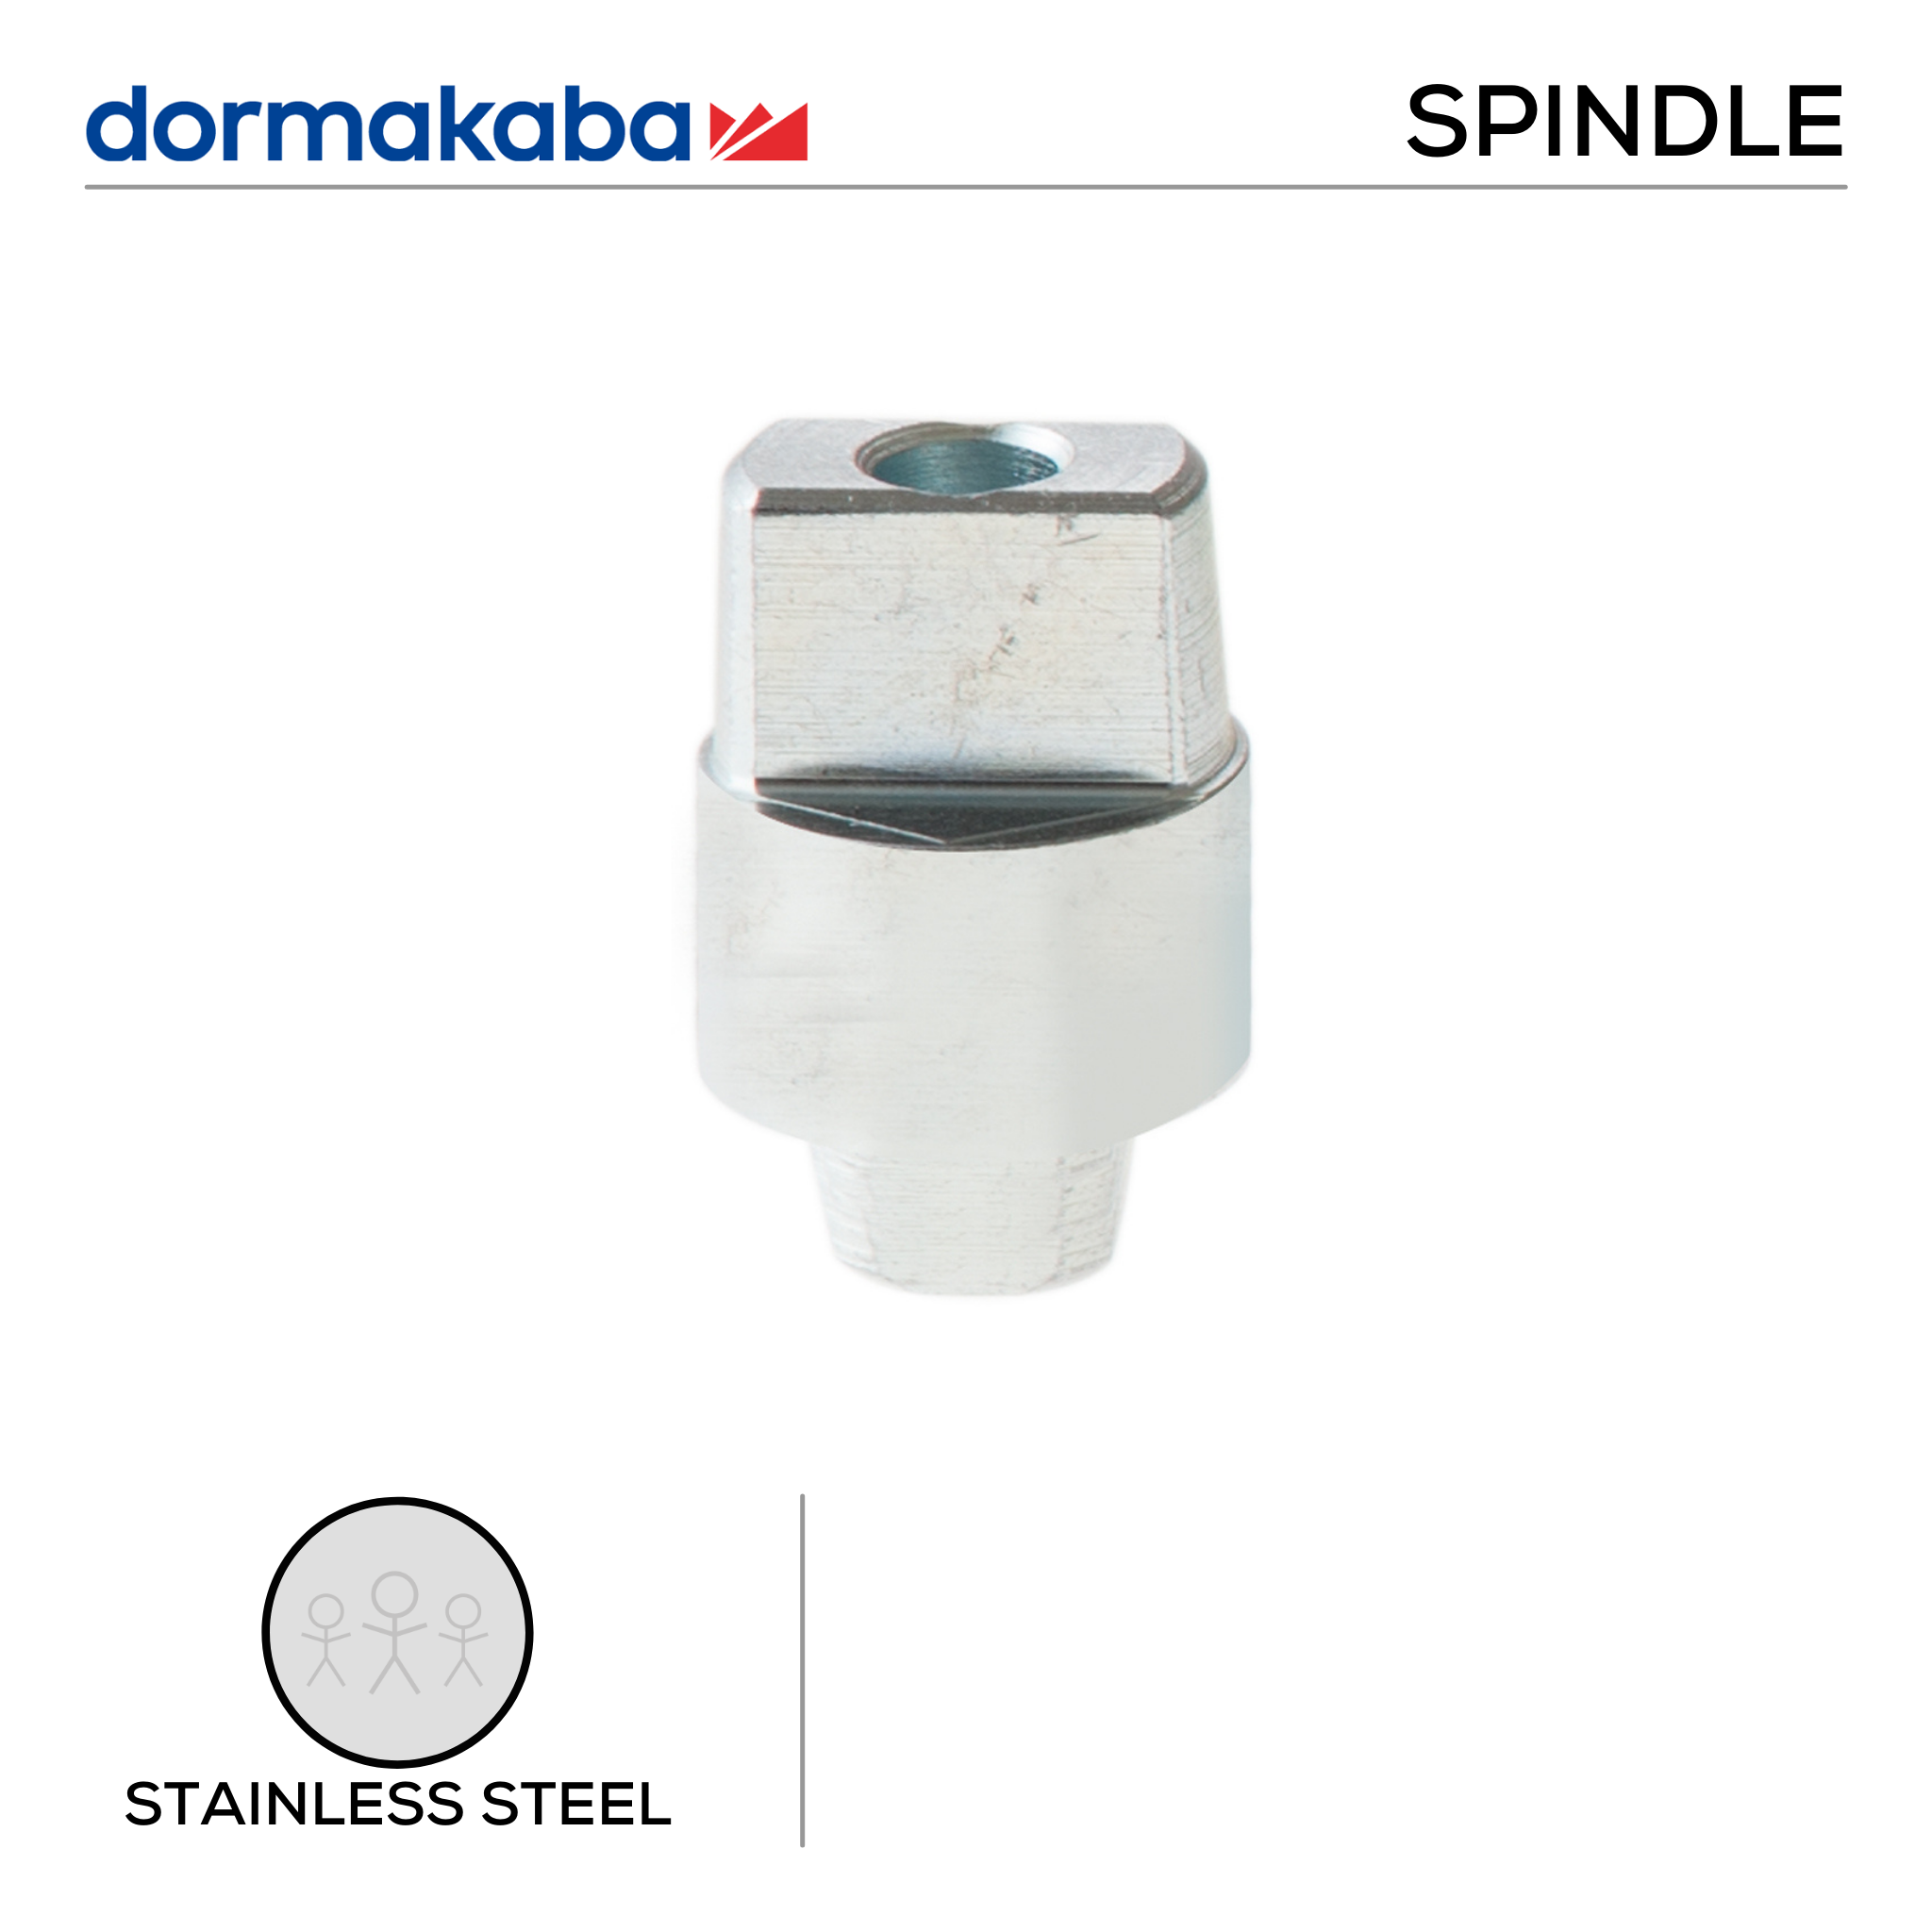 SPINDLE 5 TO 12.5MM, Spindle, Extended, Stainless Steel, DORMAKABA